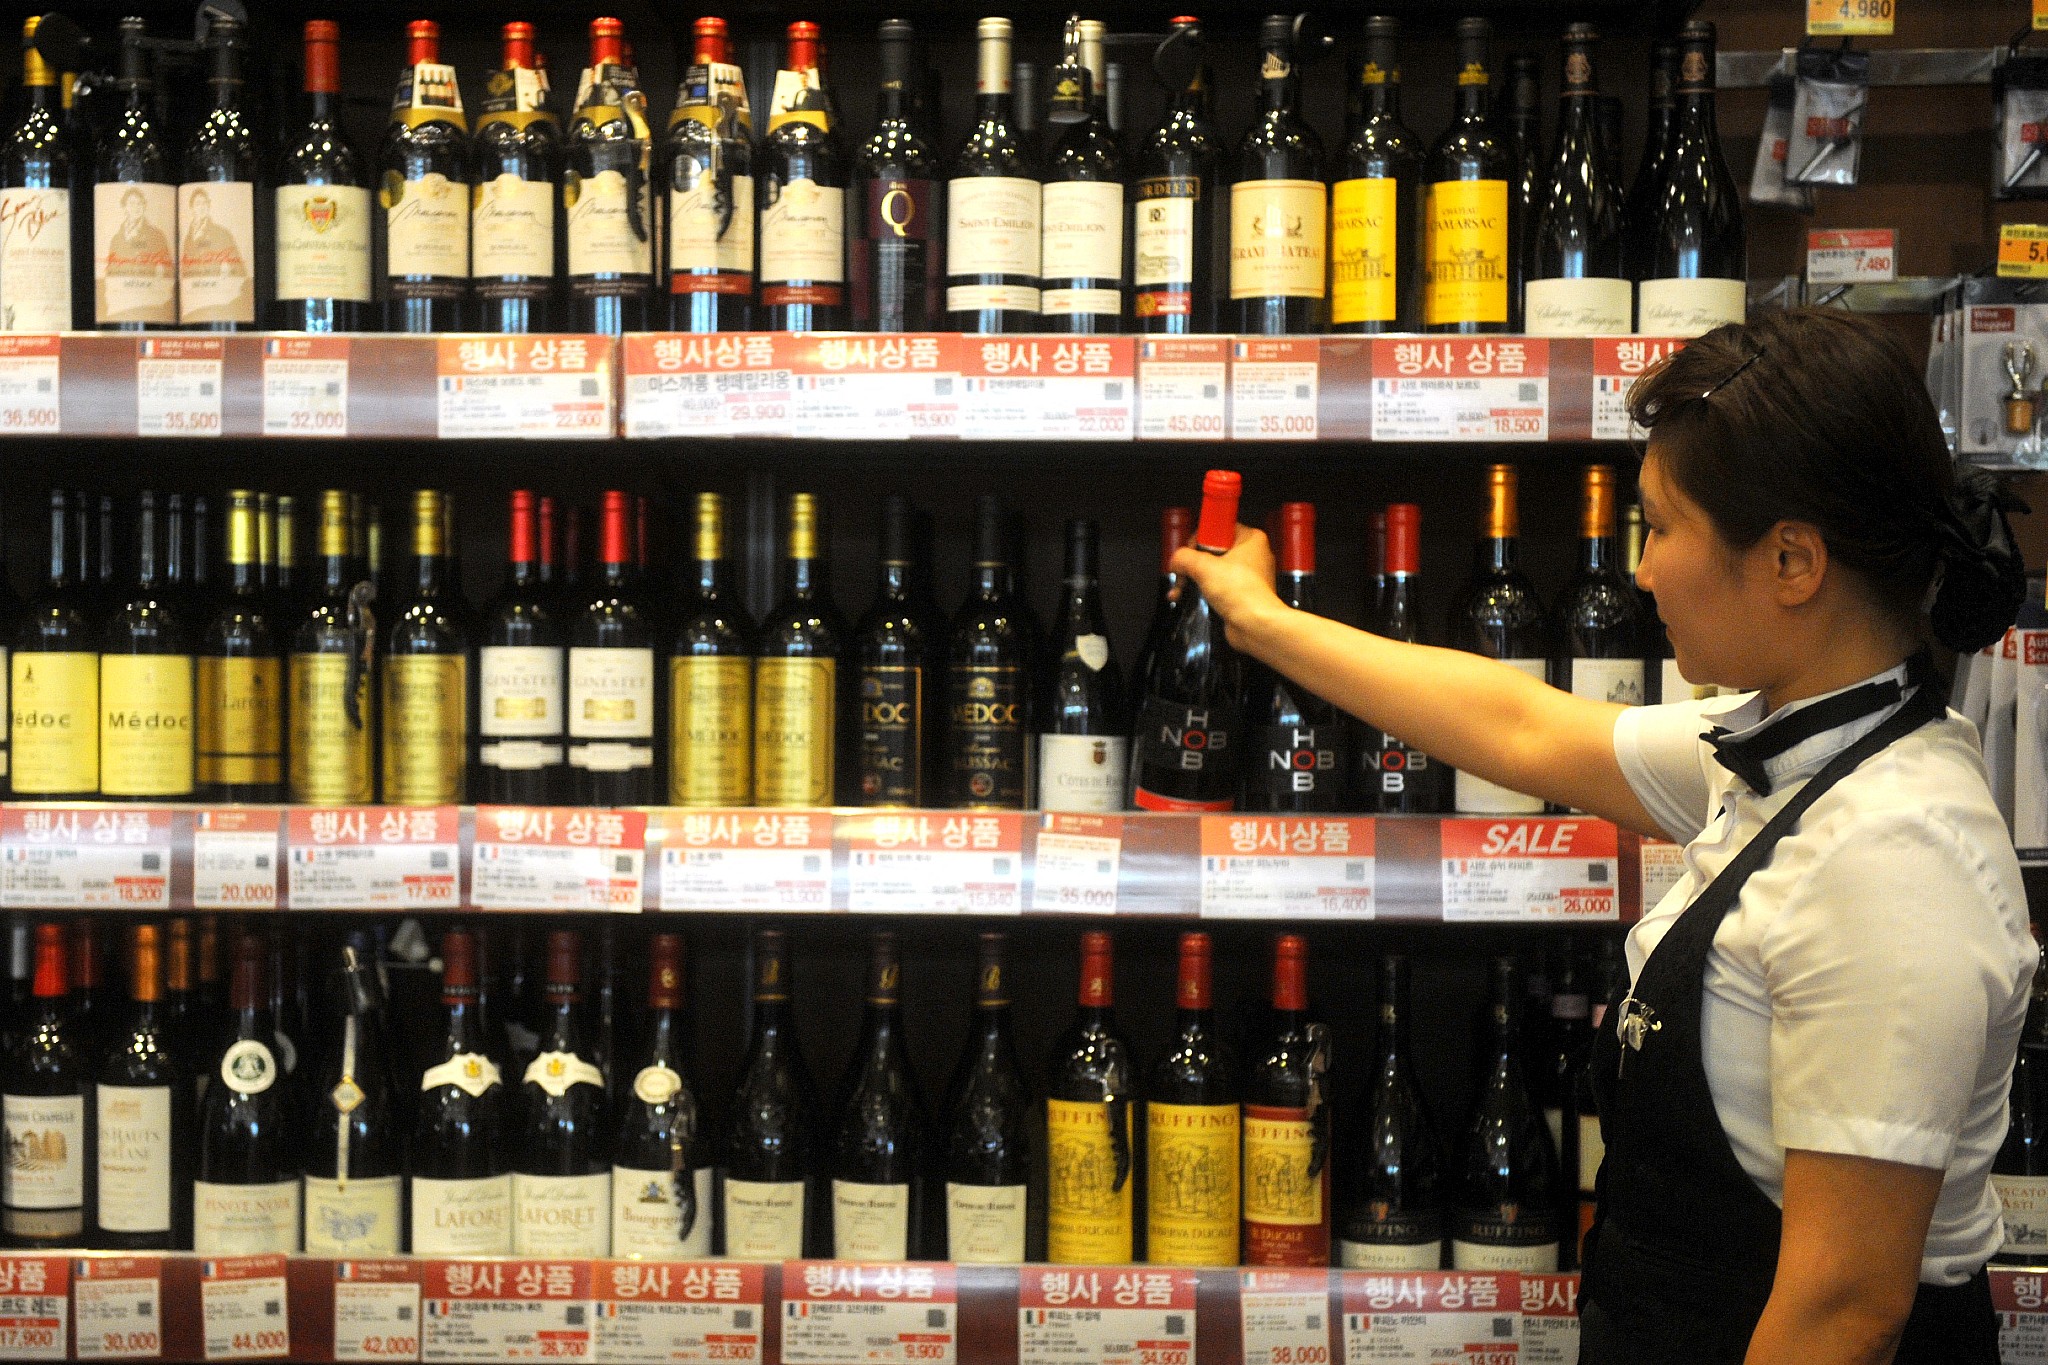 Koreans Drank More Wine in Q1 2021 As Imports Doubled